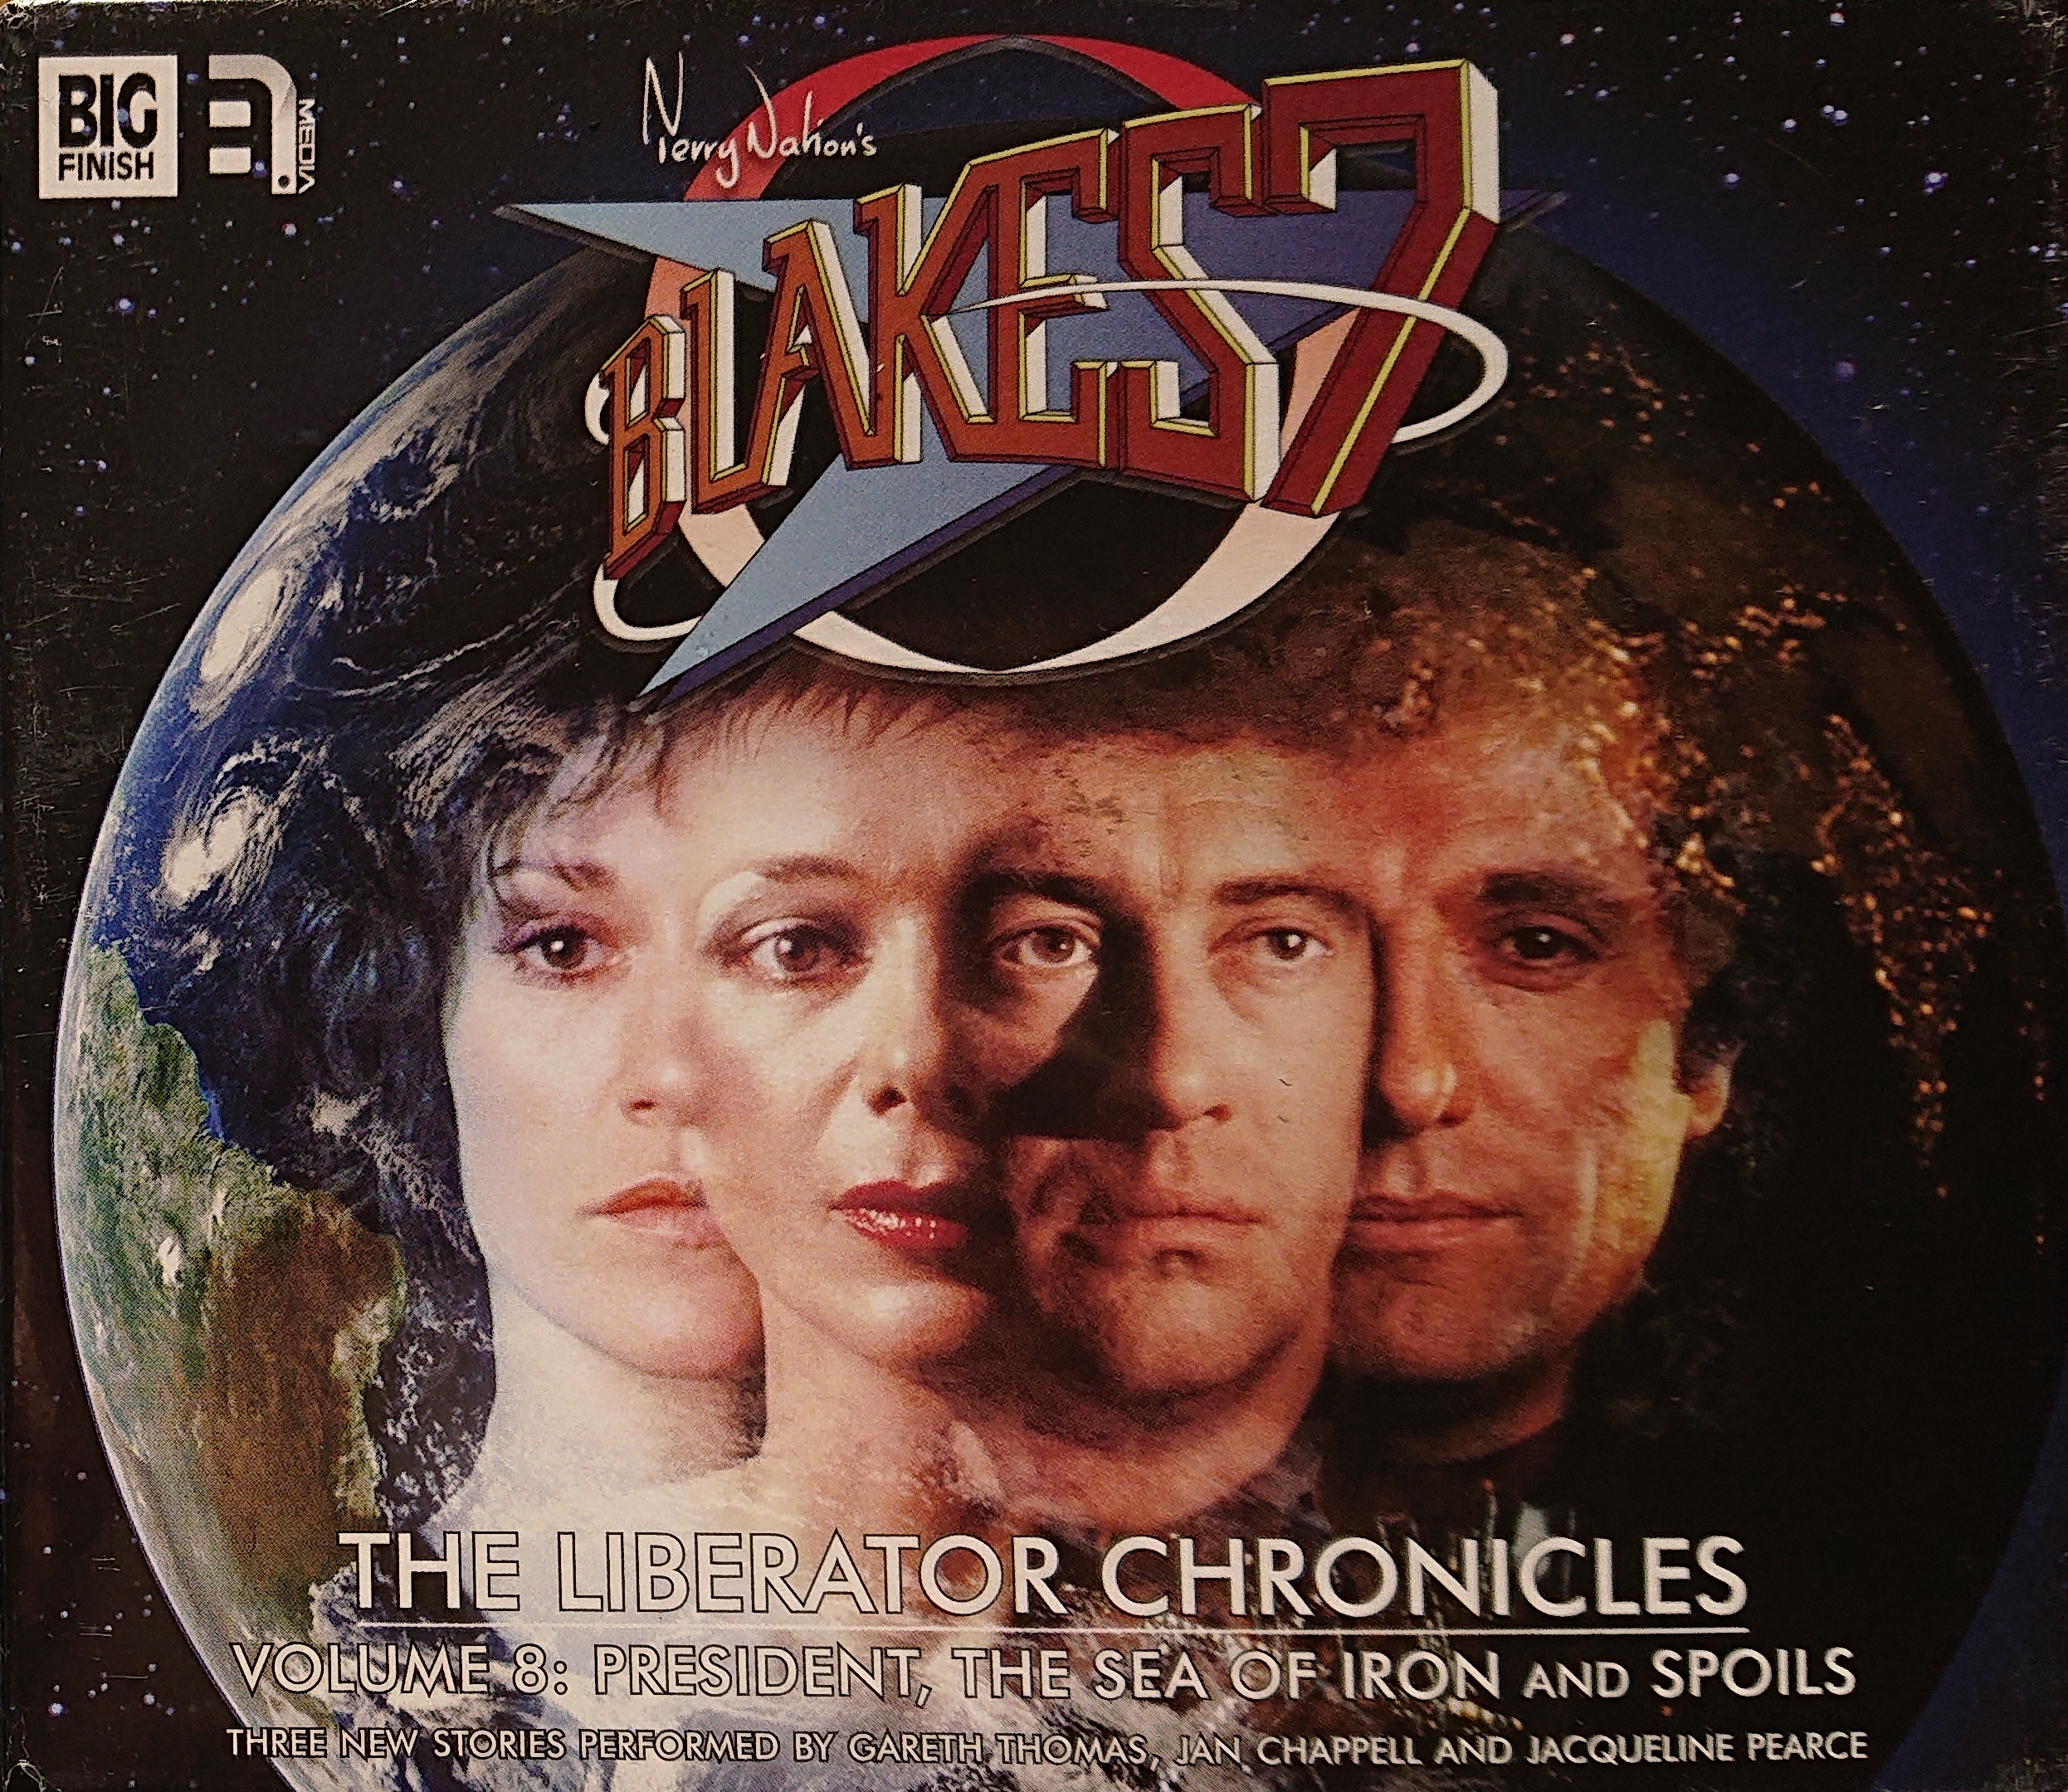 Picture of The Liberator chronicles - Volume 8 by artist Simon Guerrier / Marc Platt / James Goss from the BBC cds - Records and Tapes library